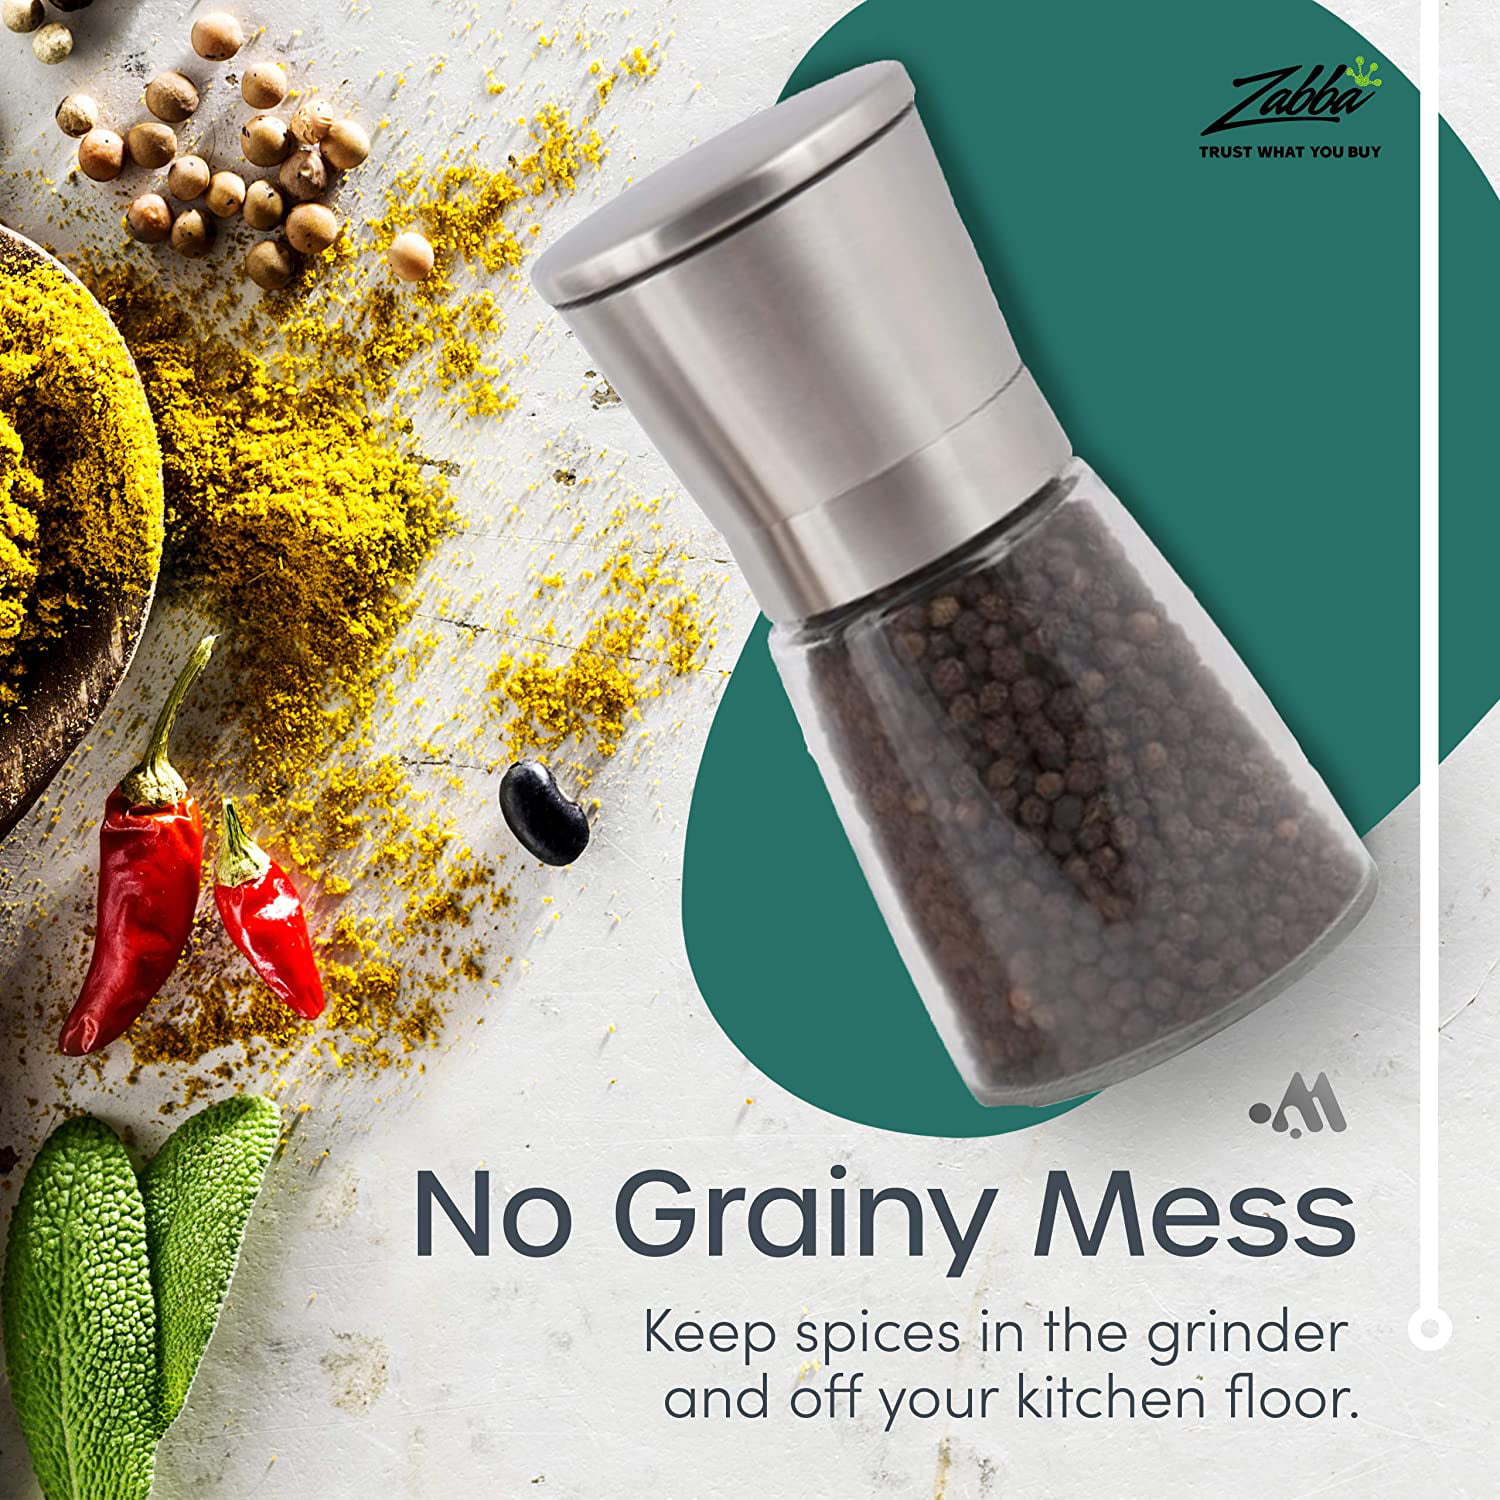 Gling Salt and Pepper Grinder Set - Refillable Sea Salt & Peppercorn Stainless Steel Shakers - 75 inch